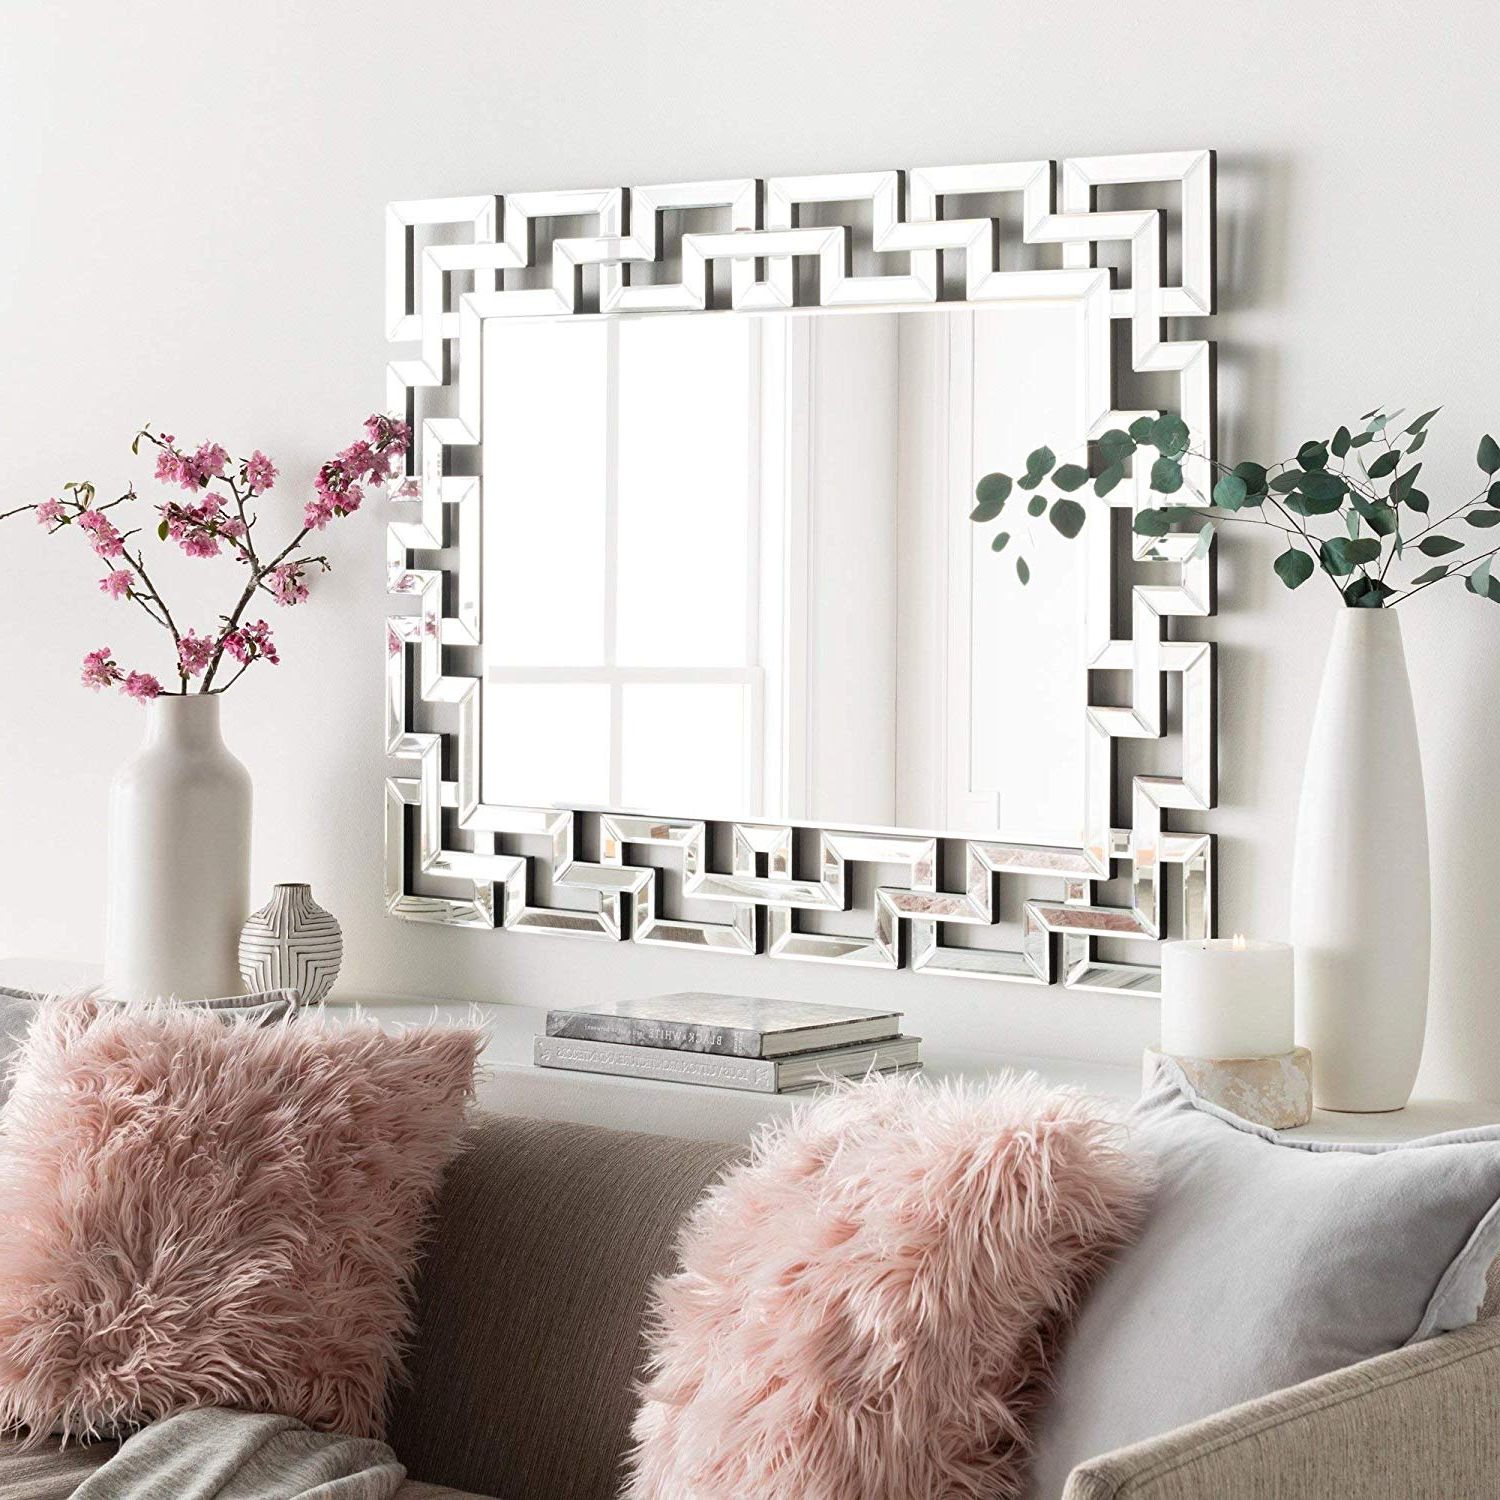 20 Best Collection of Large Decorative Wall Mirrors